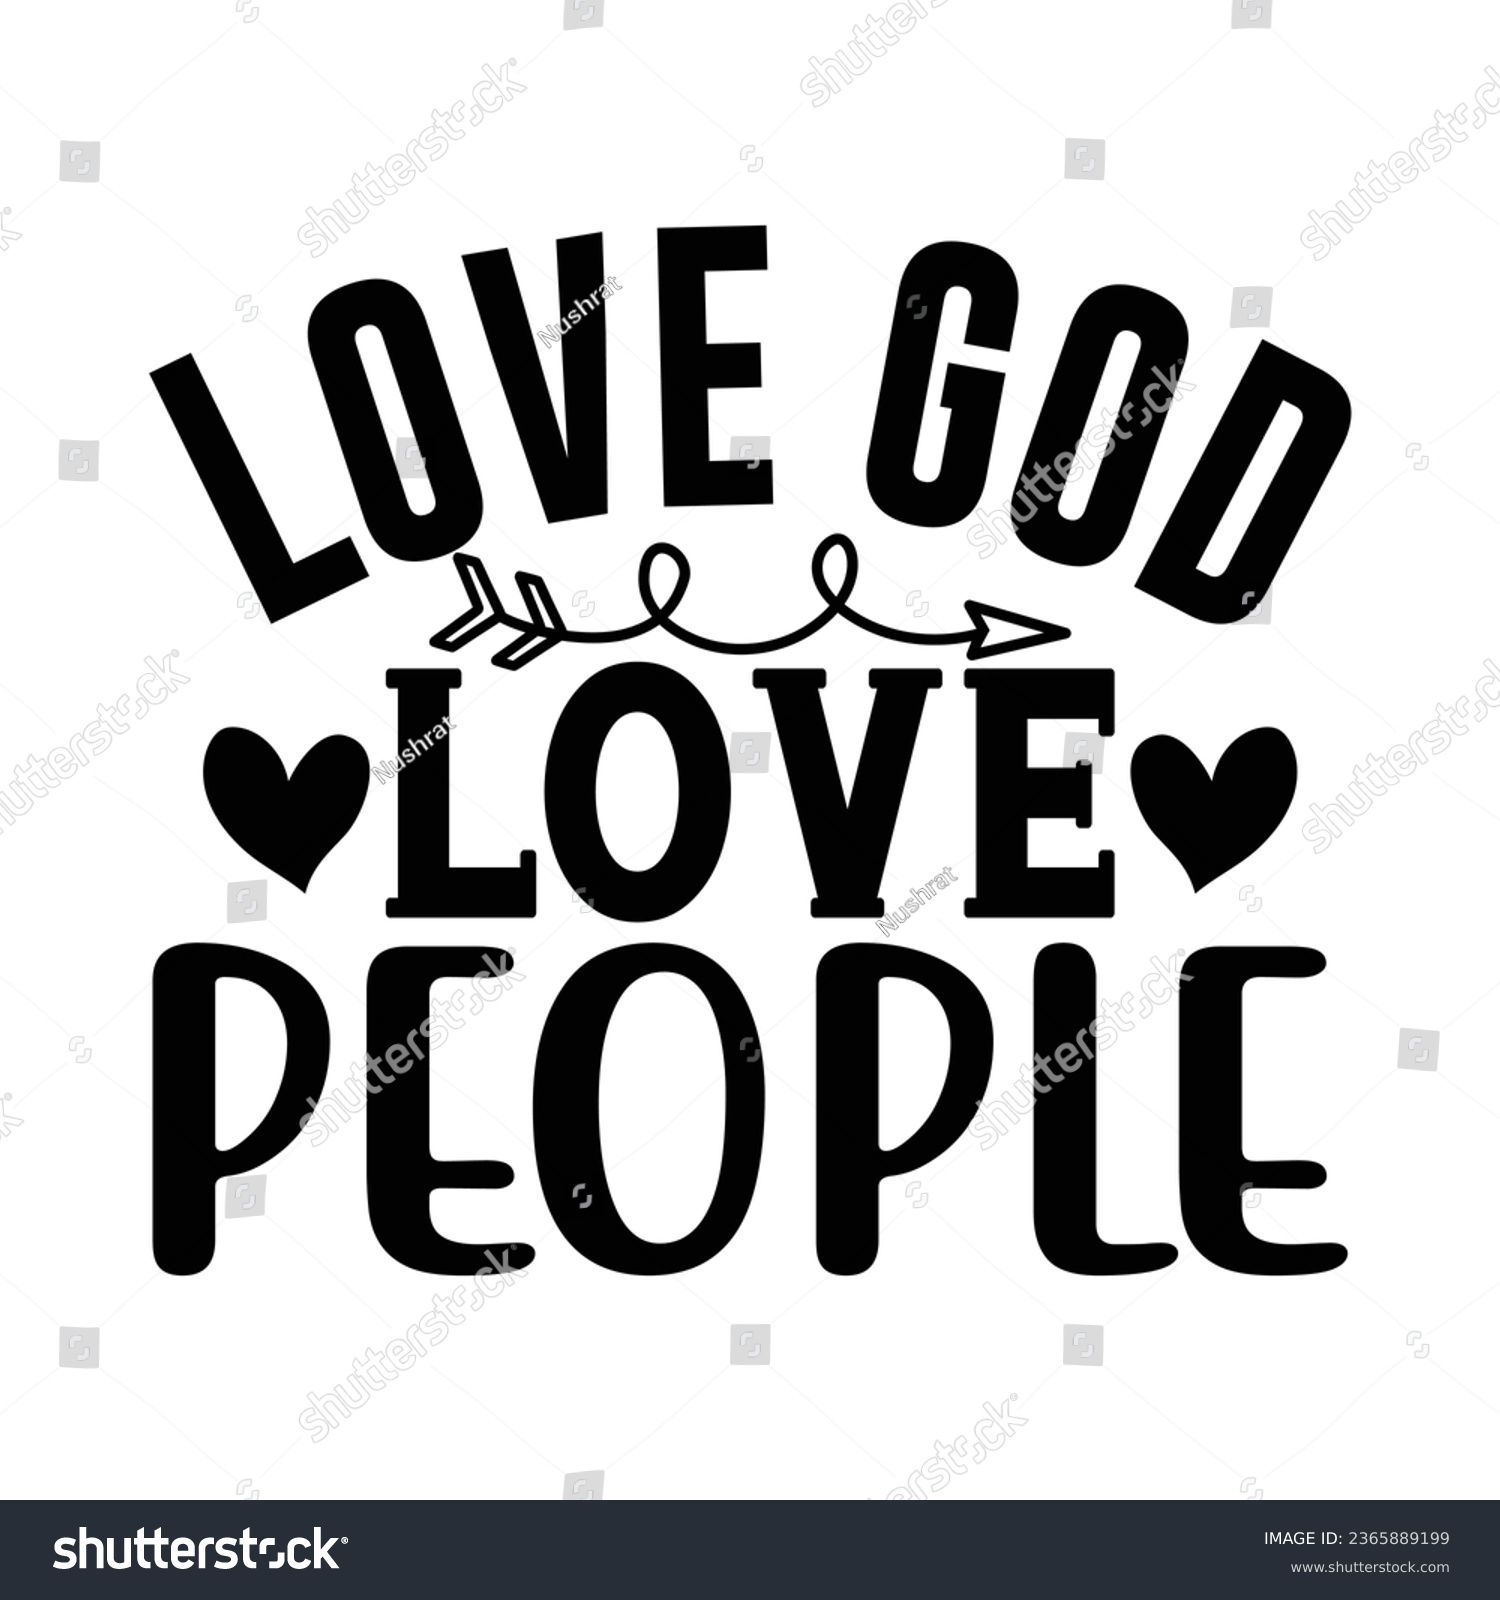 SVG of love god love people, Christian quotes  cut files Design, Christian quotes t shirt designs Template svg